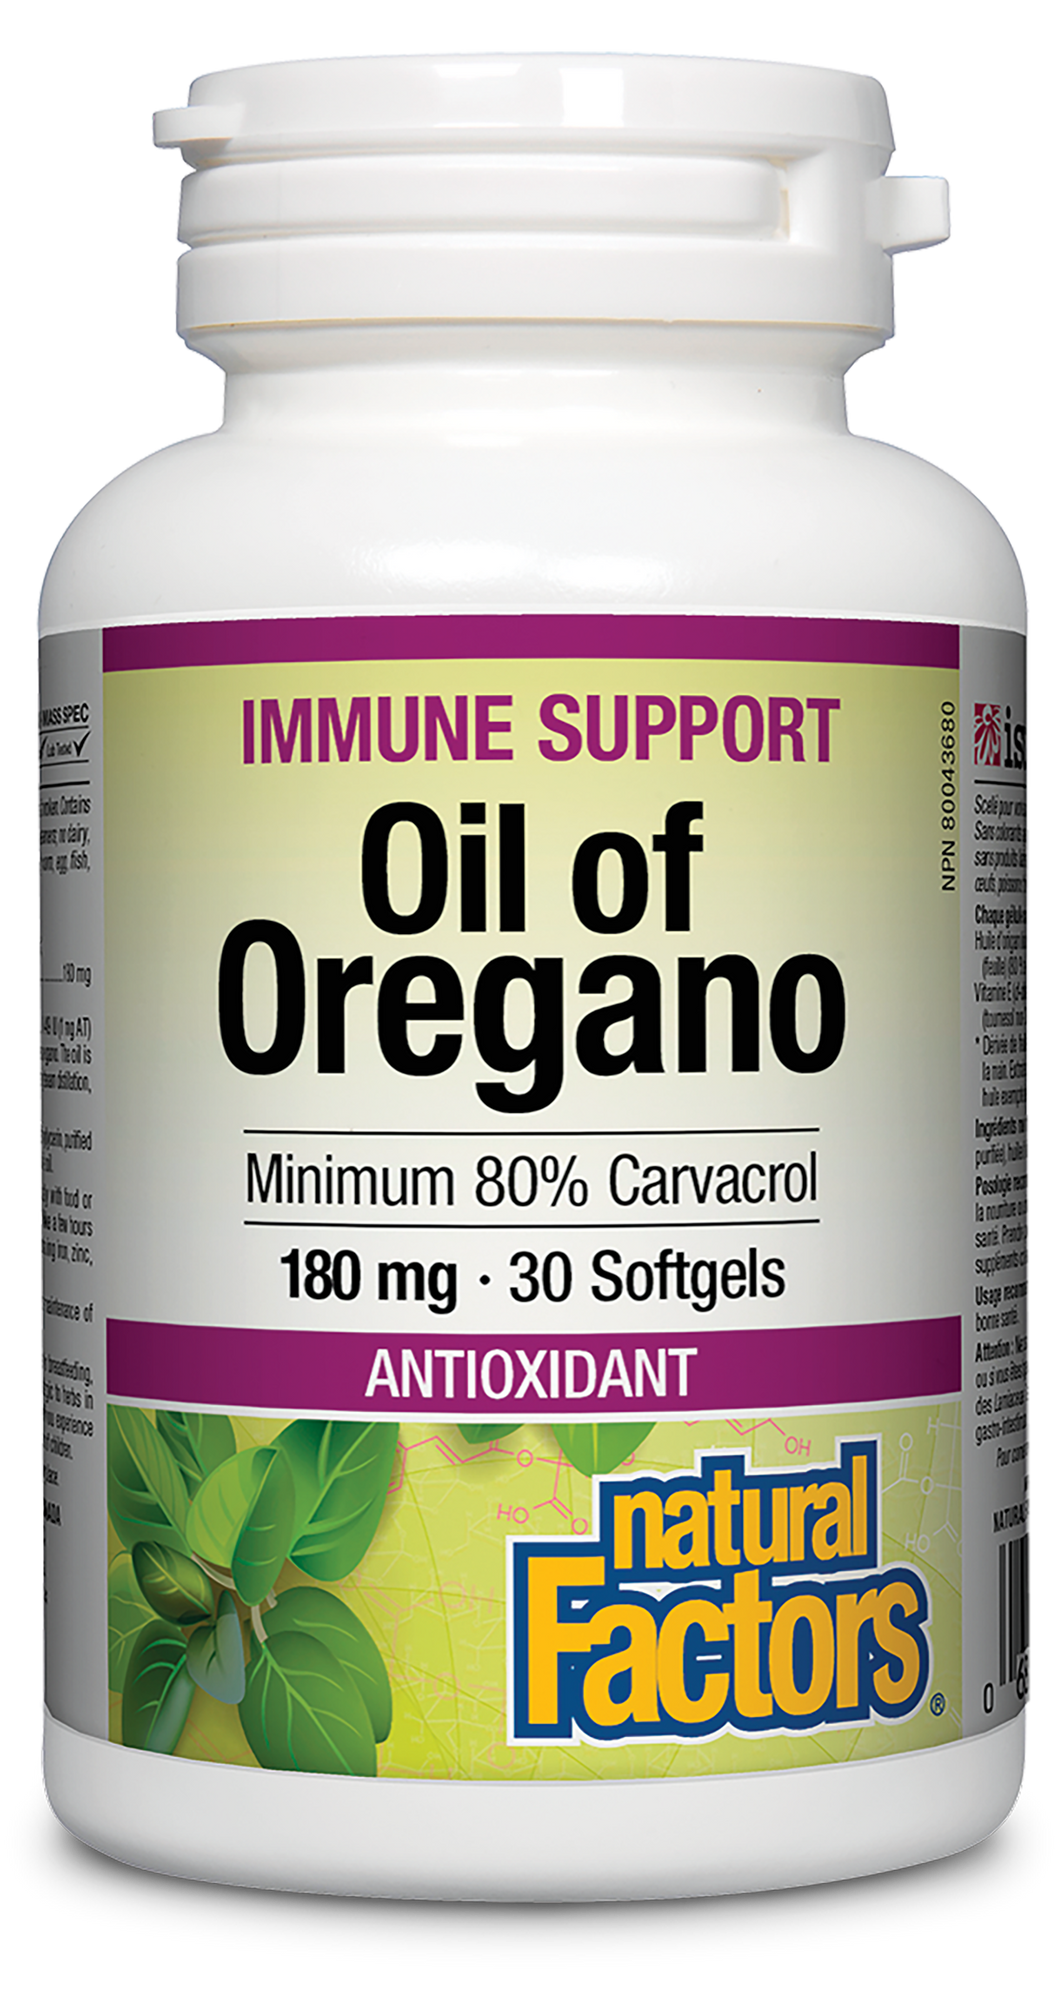 Oil of oregano is a potent herbal antimicrobial that effectively tackles bacterial, yeast, fungal, and parasitic infections. It offers powerful antioxidant protection, immune system support, and is used to help relieve various respiratory conditions. Natural Factors Organic Oil of Oregano softgels are a convenient way to take this pungent herb.